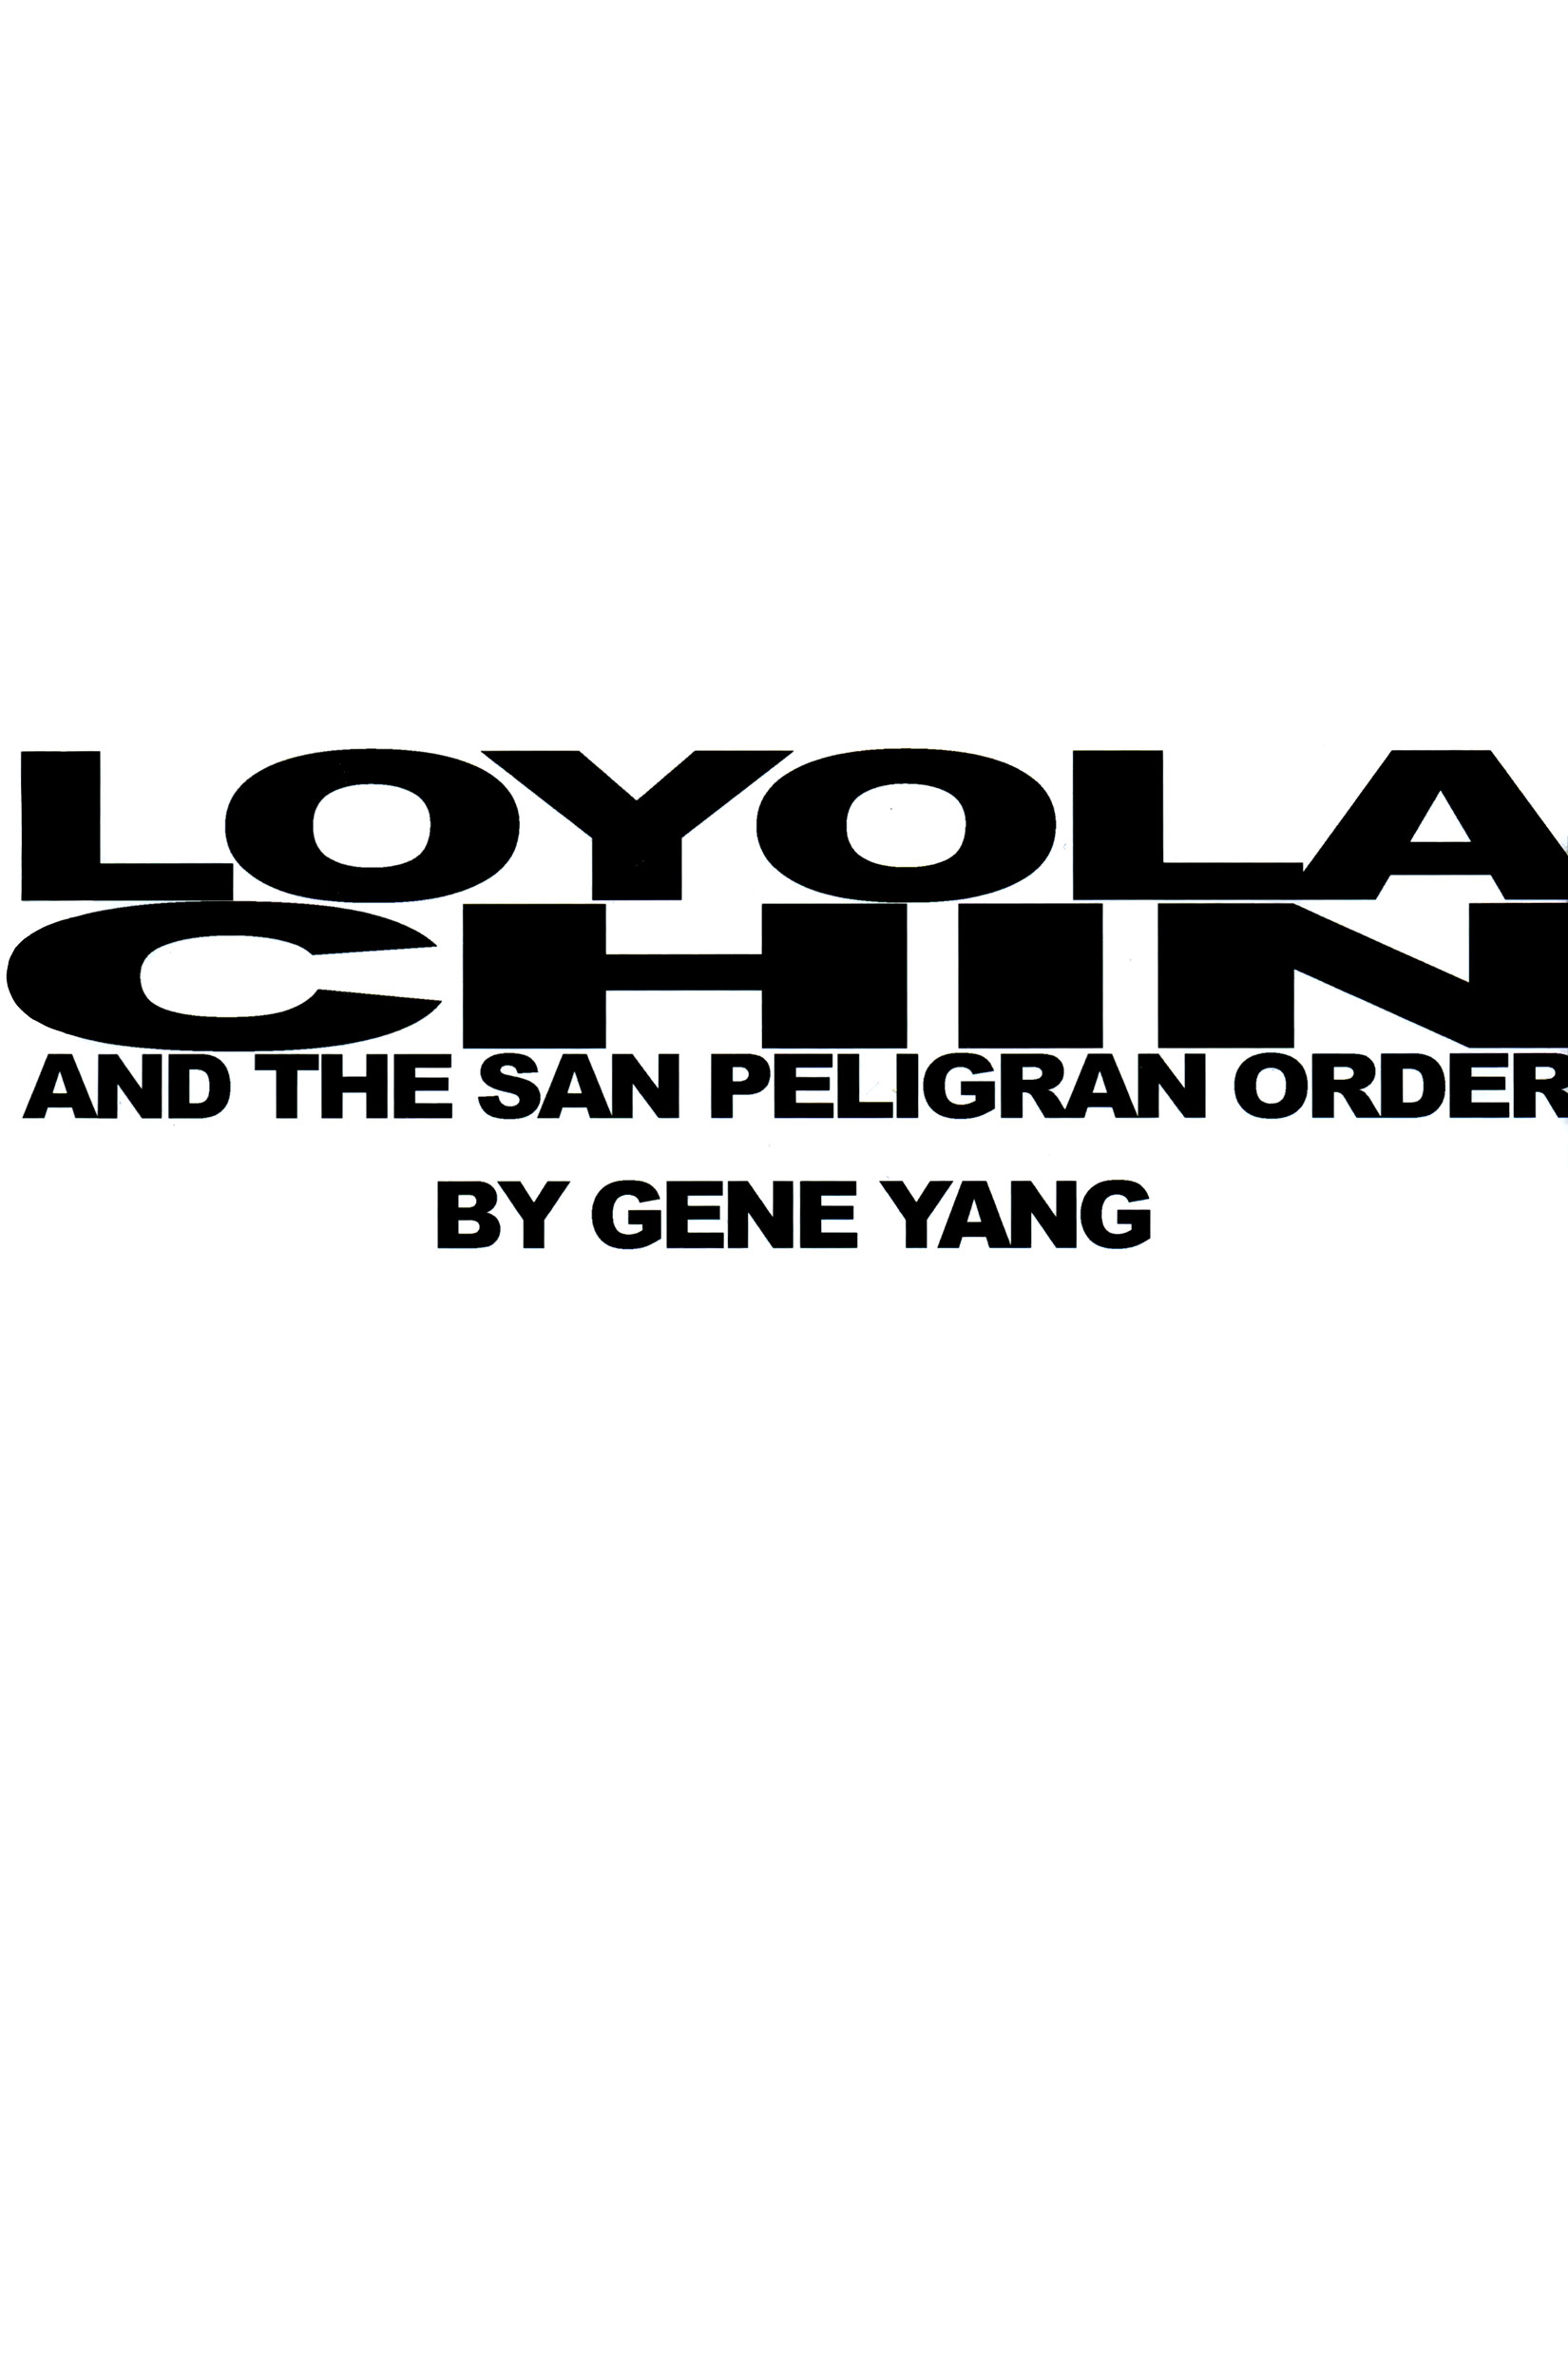 Read online Loyola Chin and the San Peligran Order comic -  Issue # TPB - 3